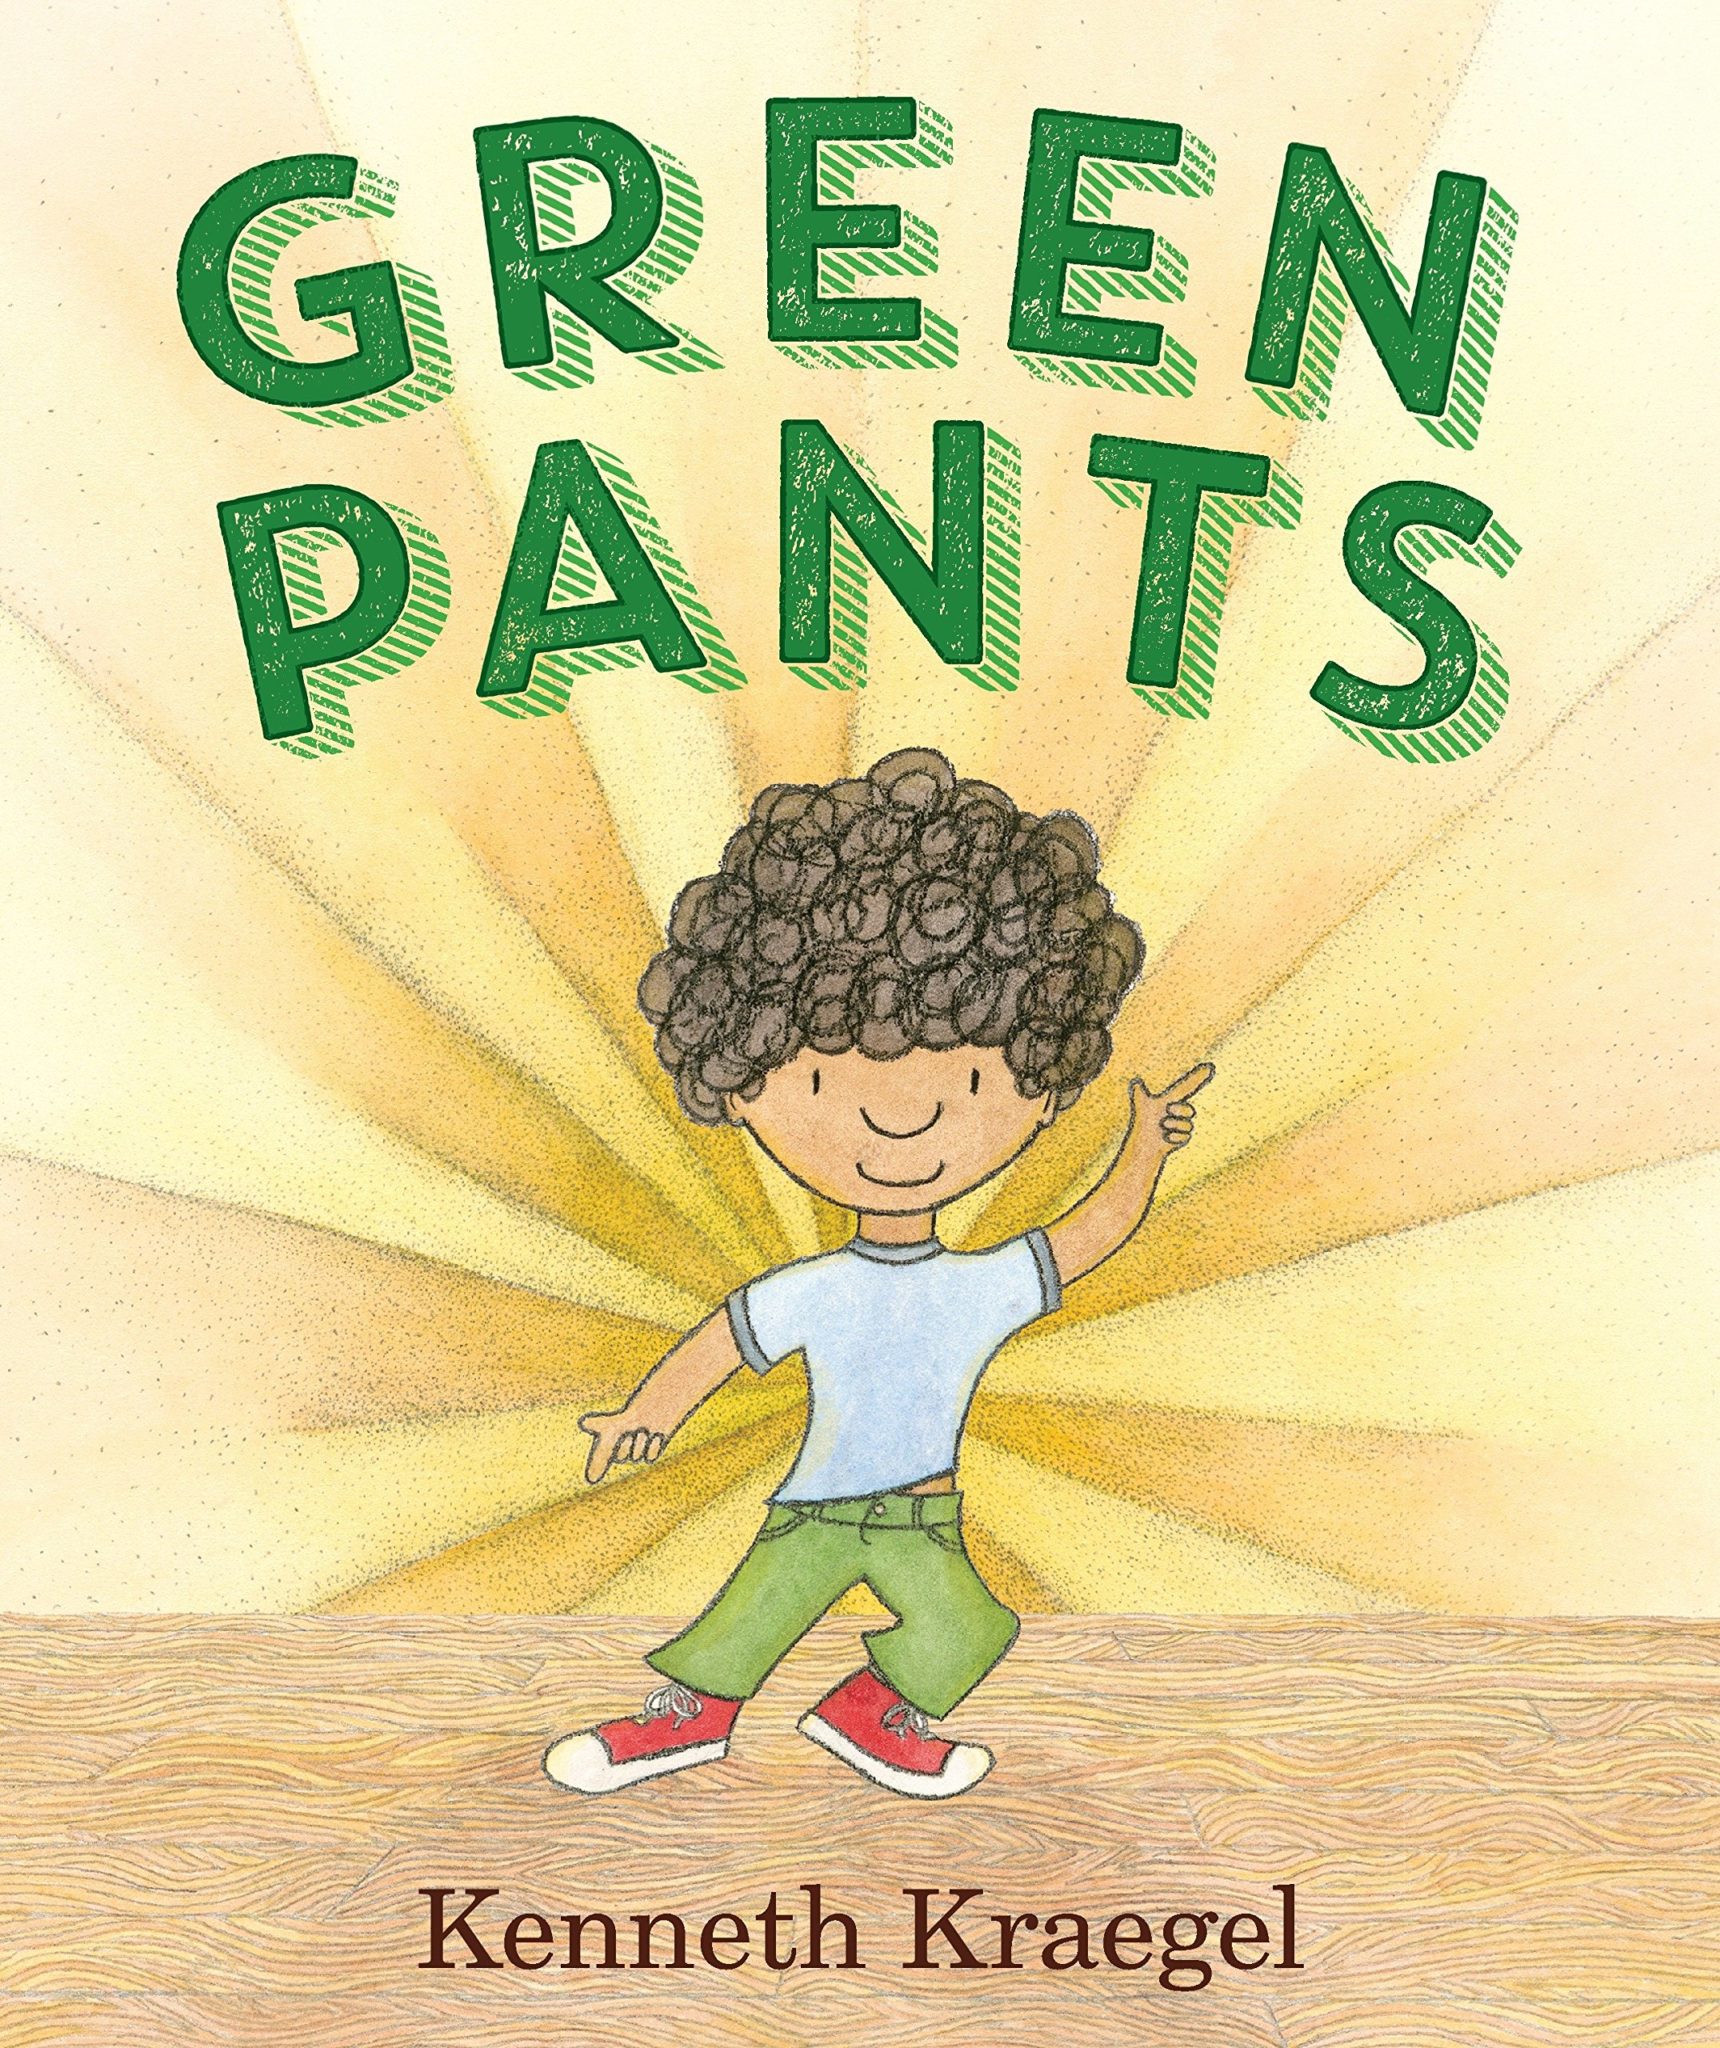 The cover of "Green Pants" features a brown-skinned boy with curly hair striking a dance pose.